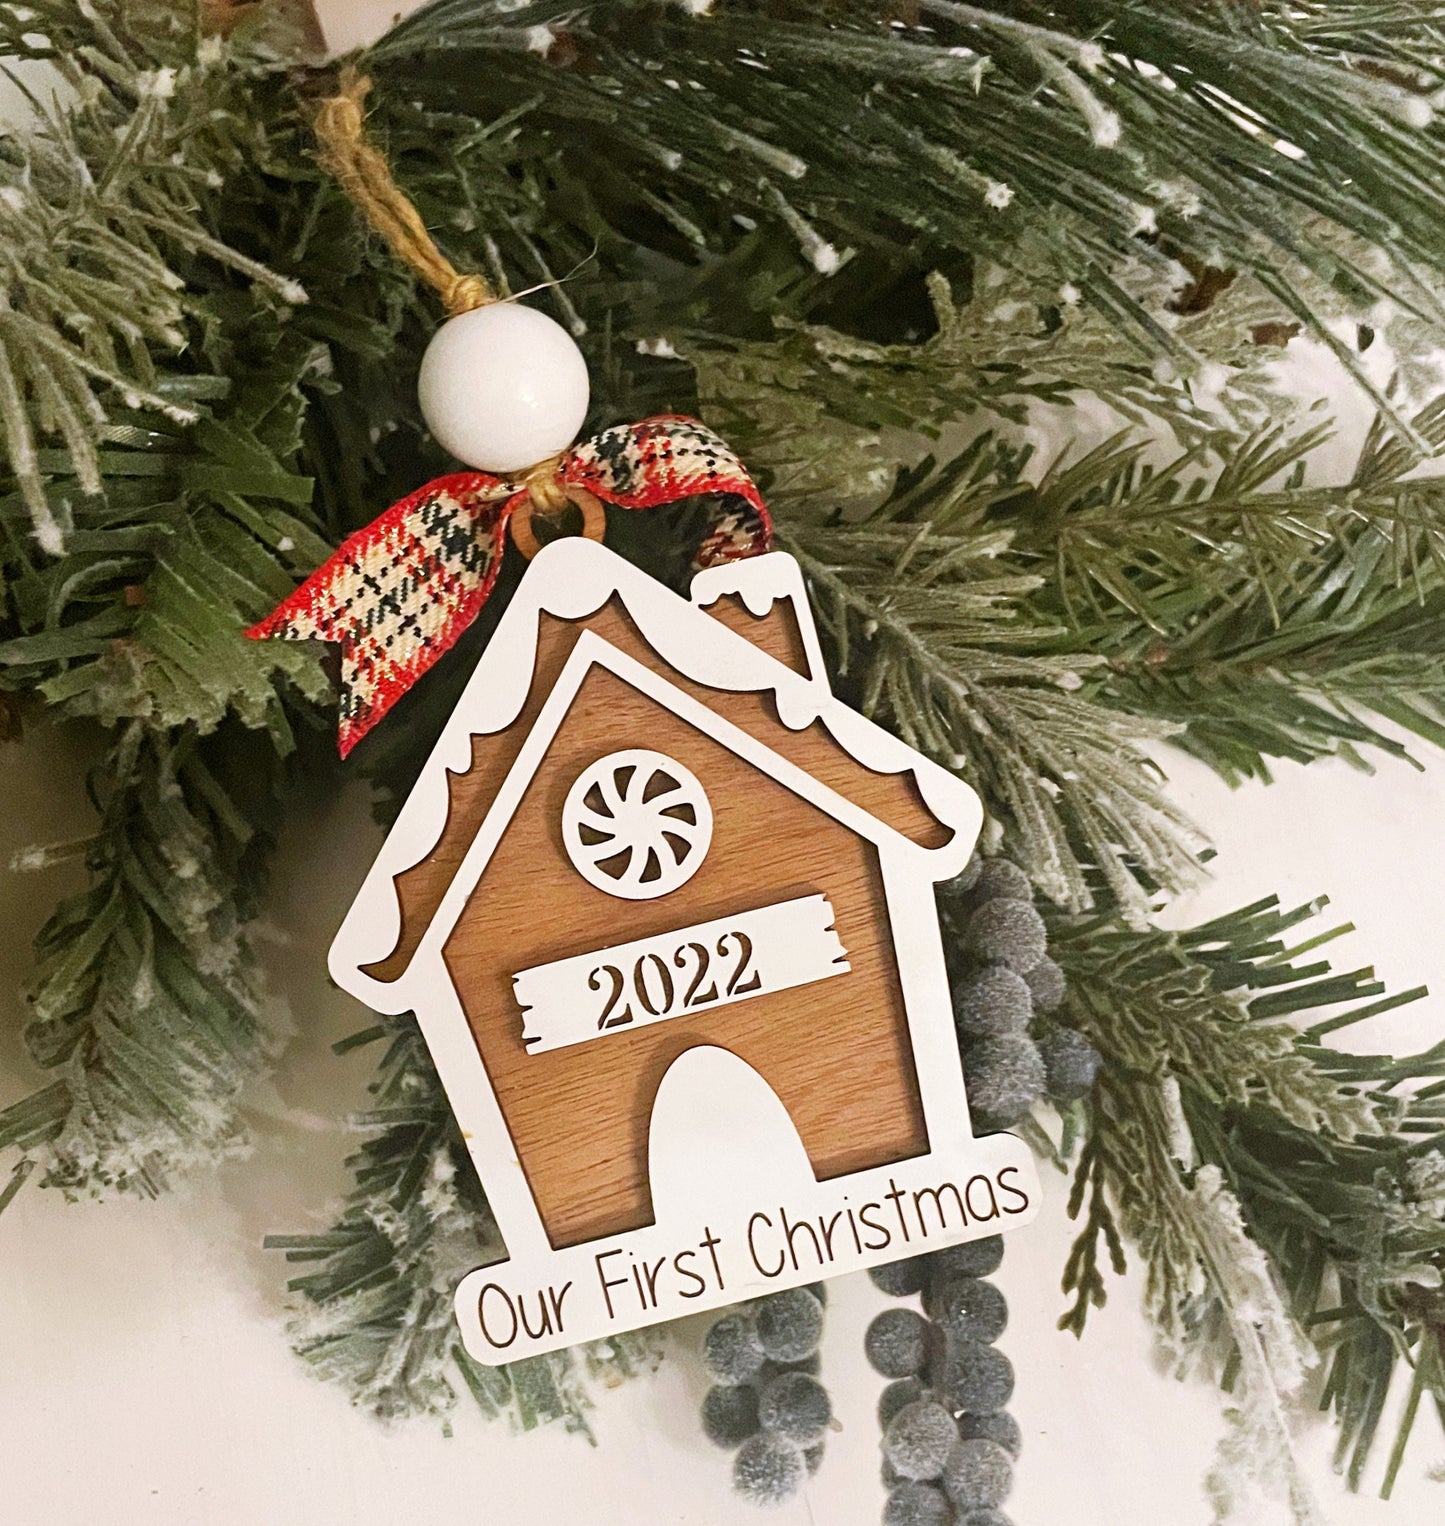 Our First Christmas Gift, Our First Christmas Ornament, Wooden Ornament, Handmade Wooden Ornament